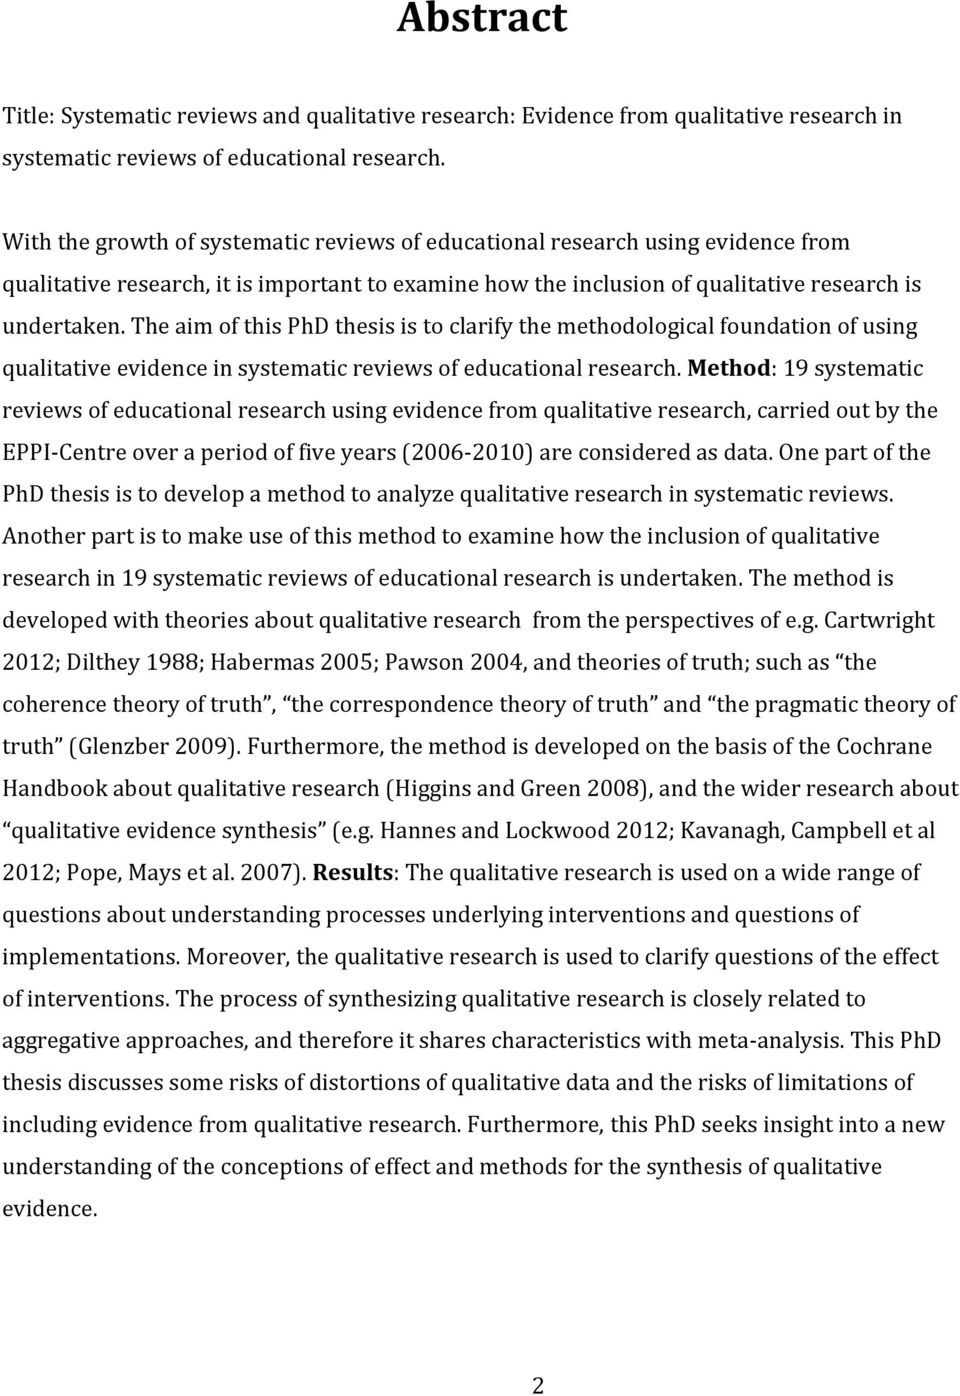 The aim of this PhD thesis is to clarify the methodological foundation of using qualitative evidence in systematic reviews of educational research.